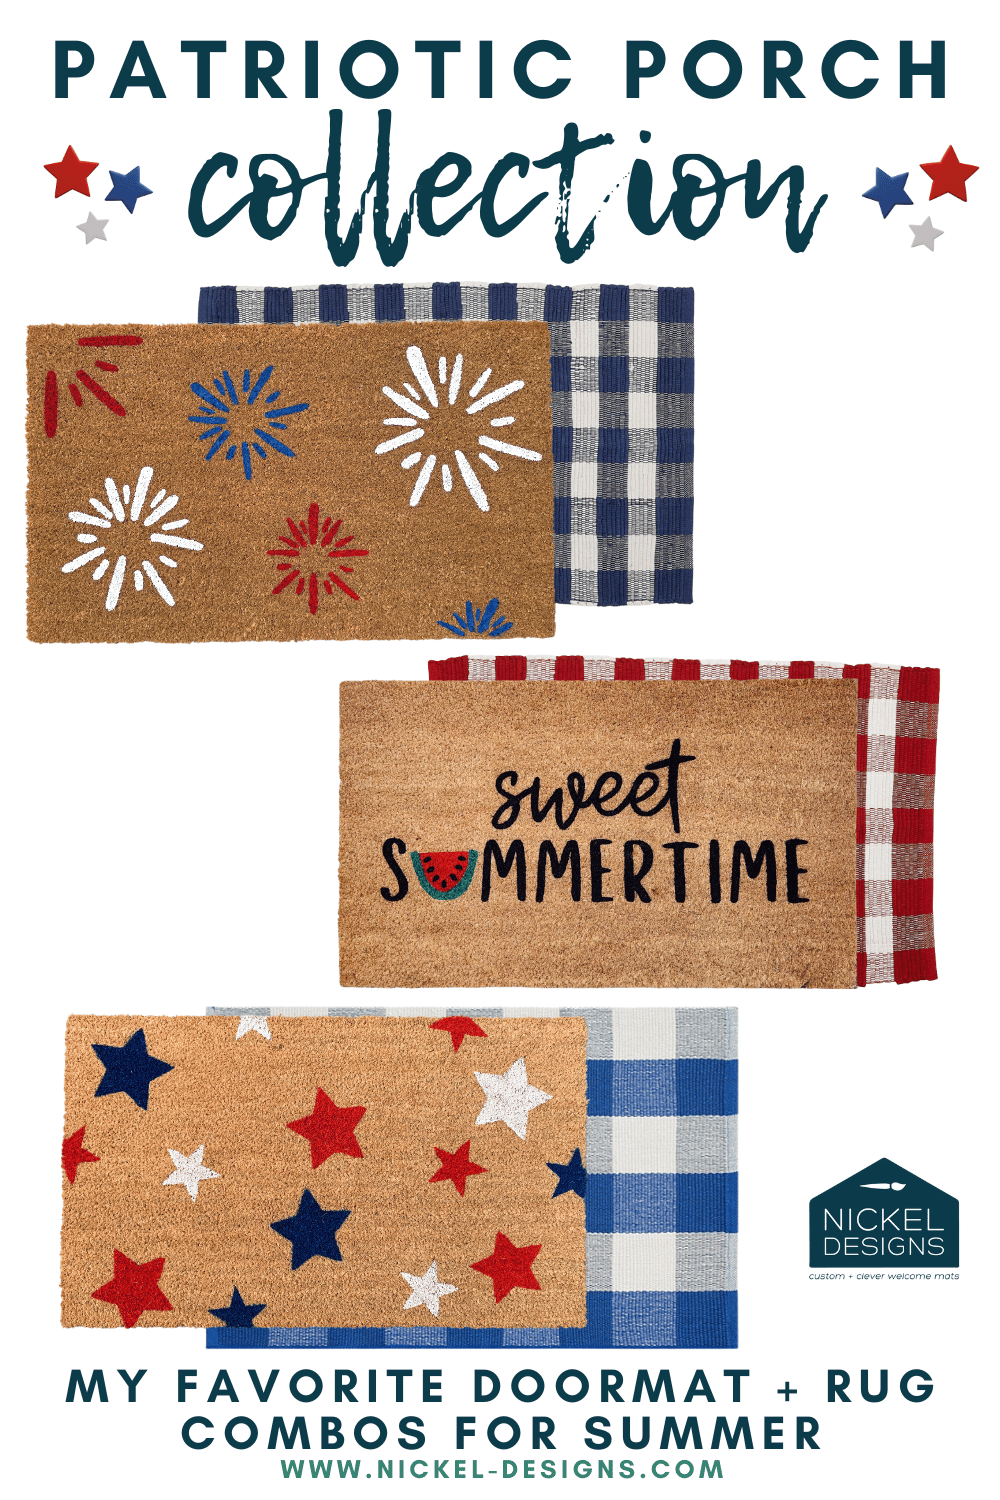 Our NEW Summer Doormats are now available!